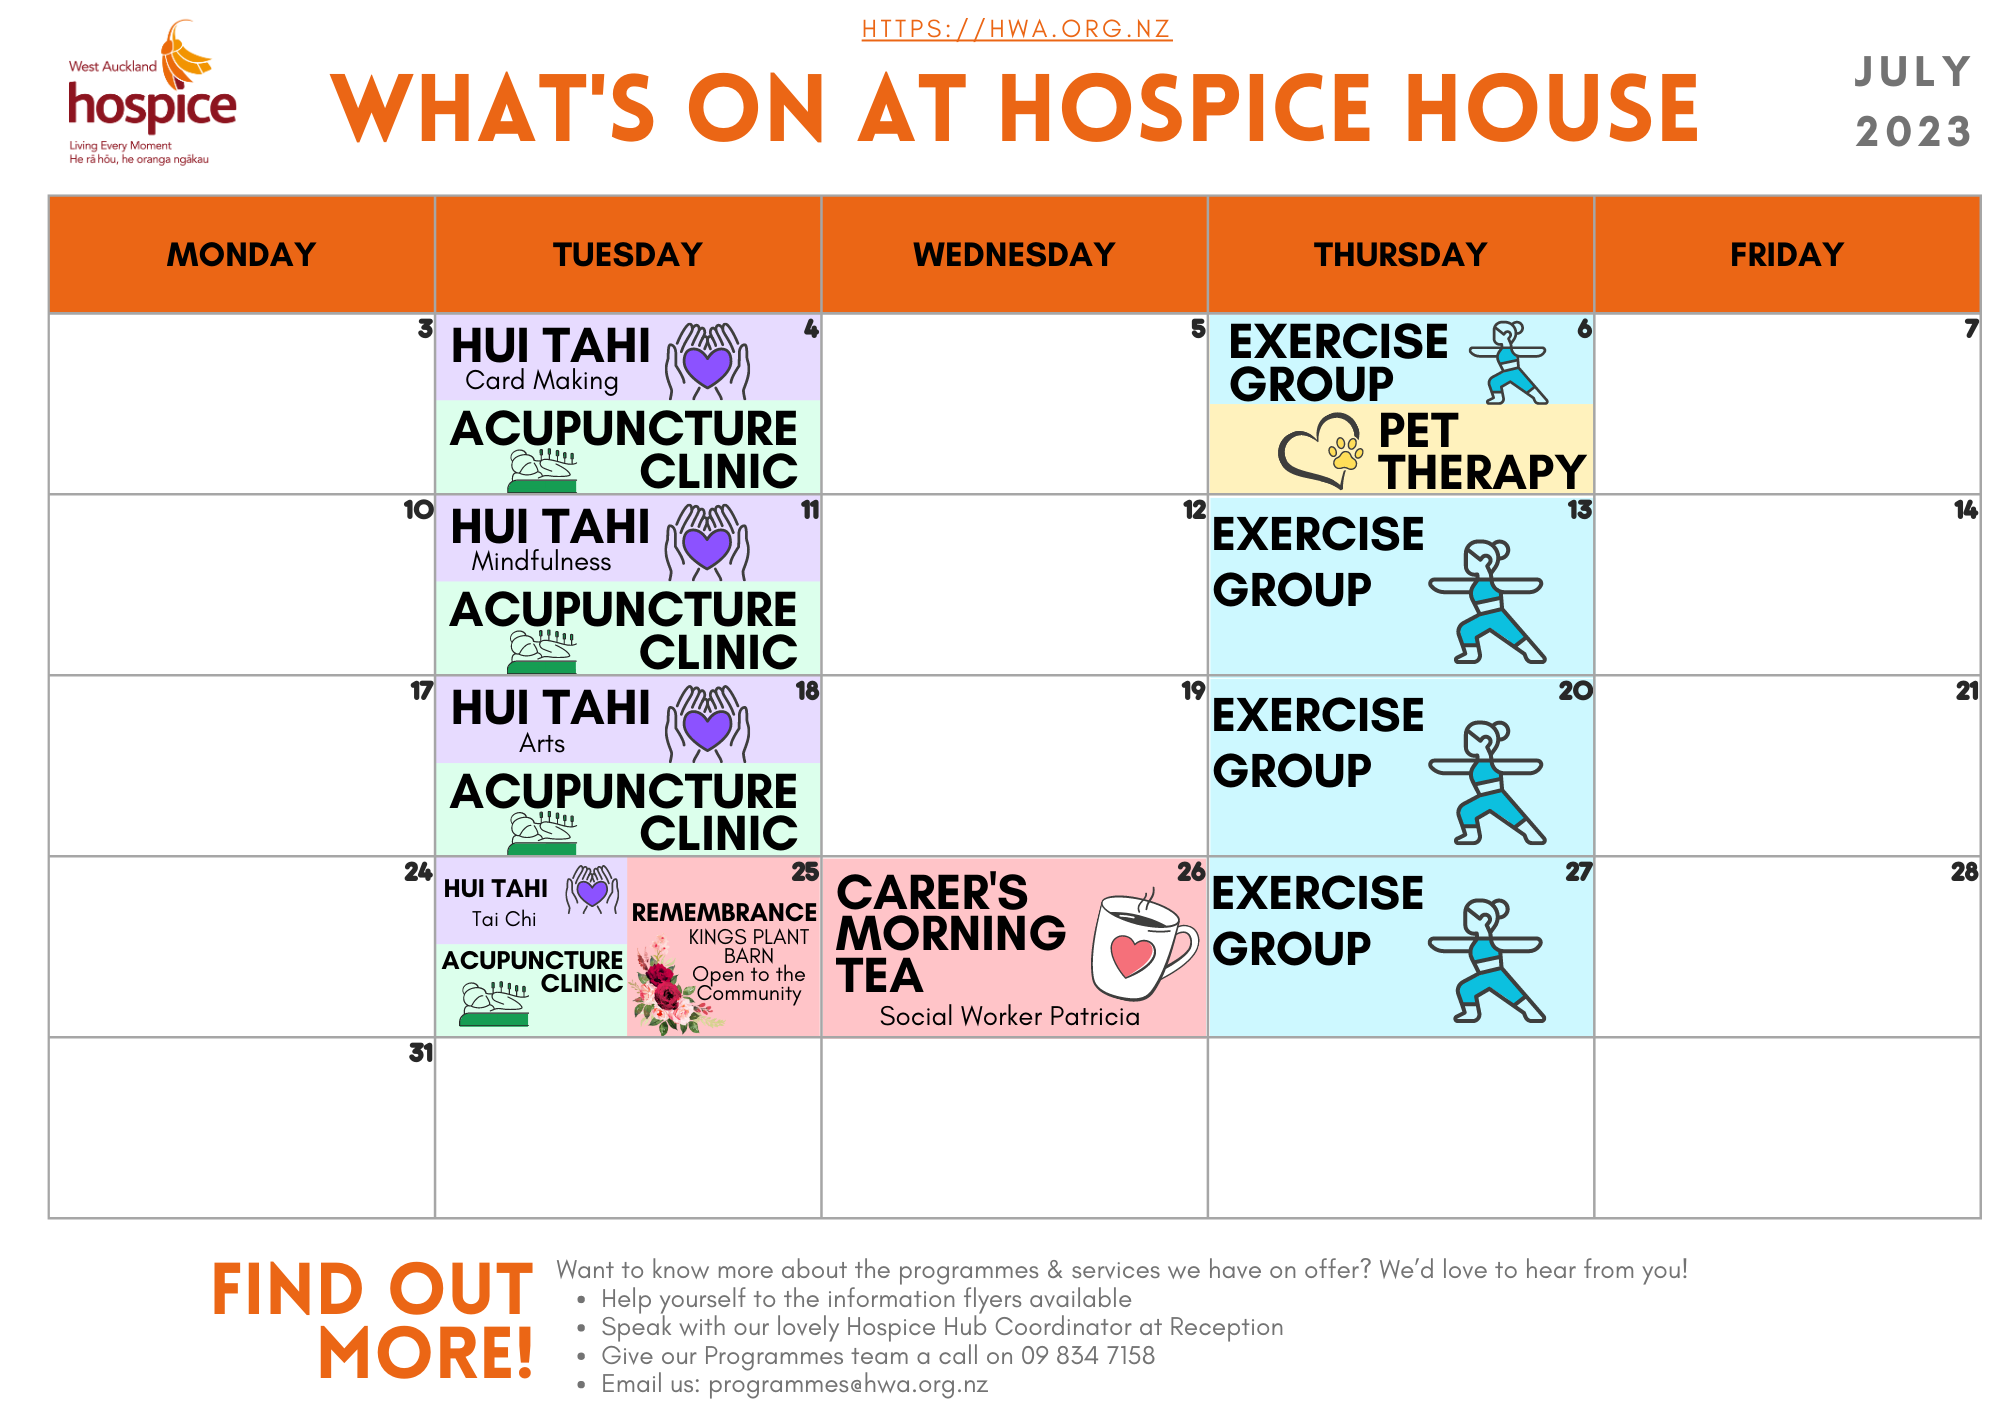 What's on at Hospice House for July 2023